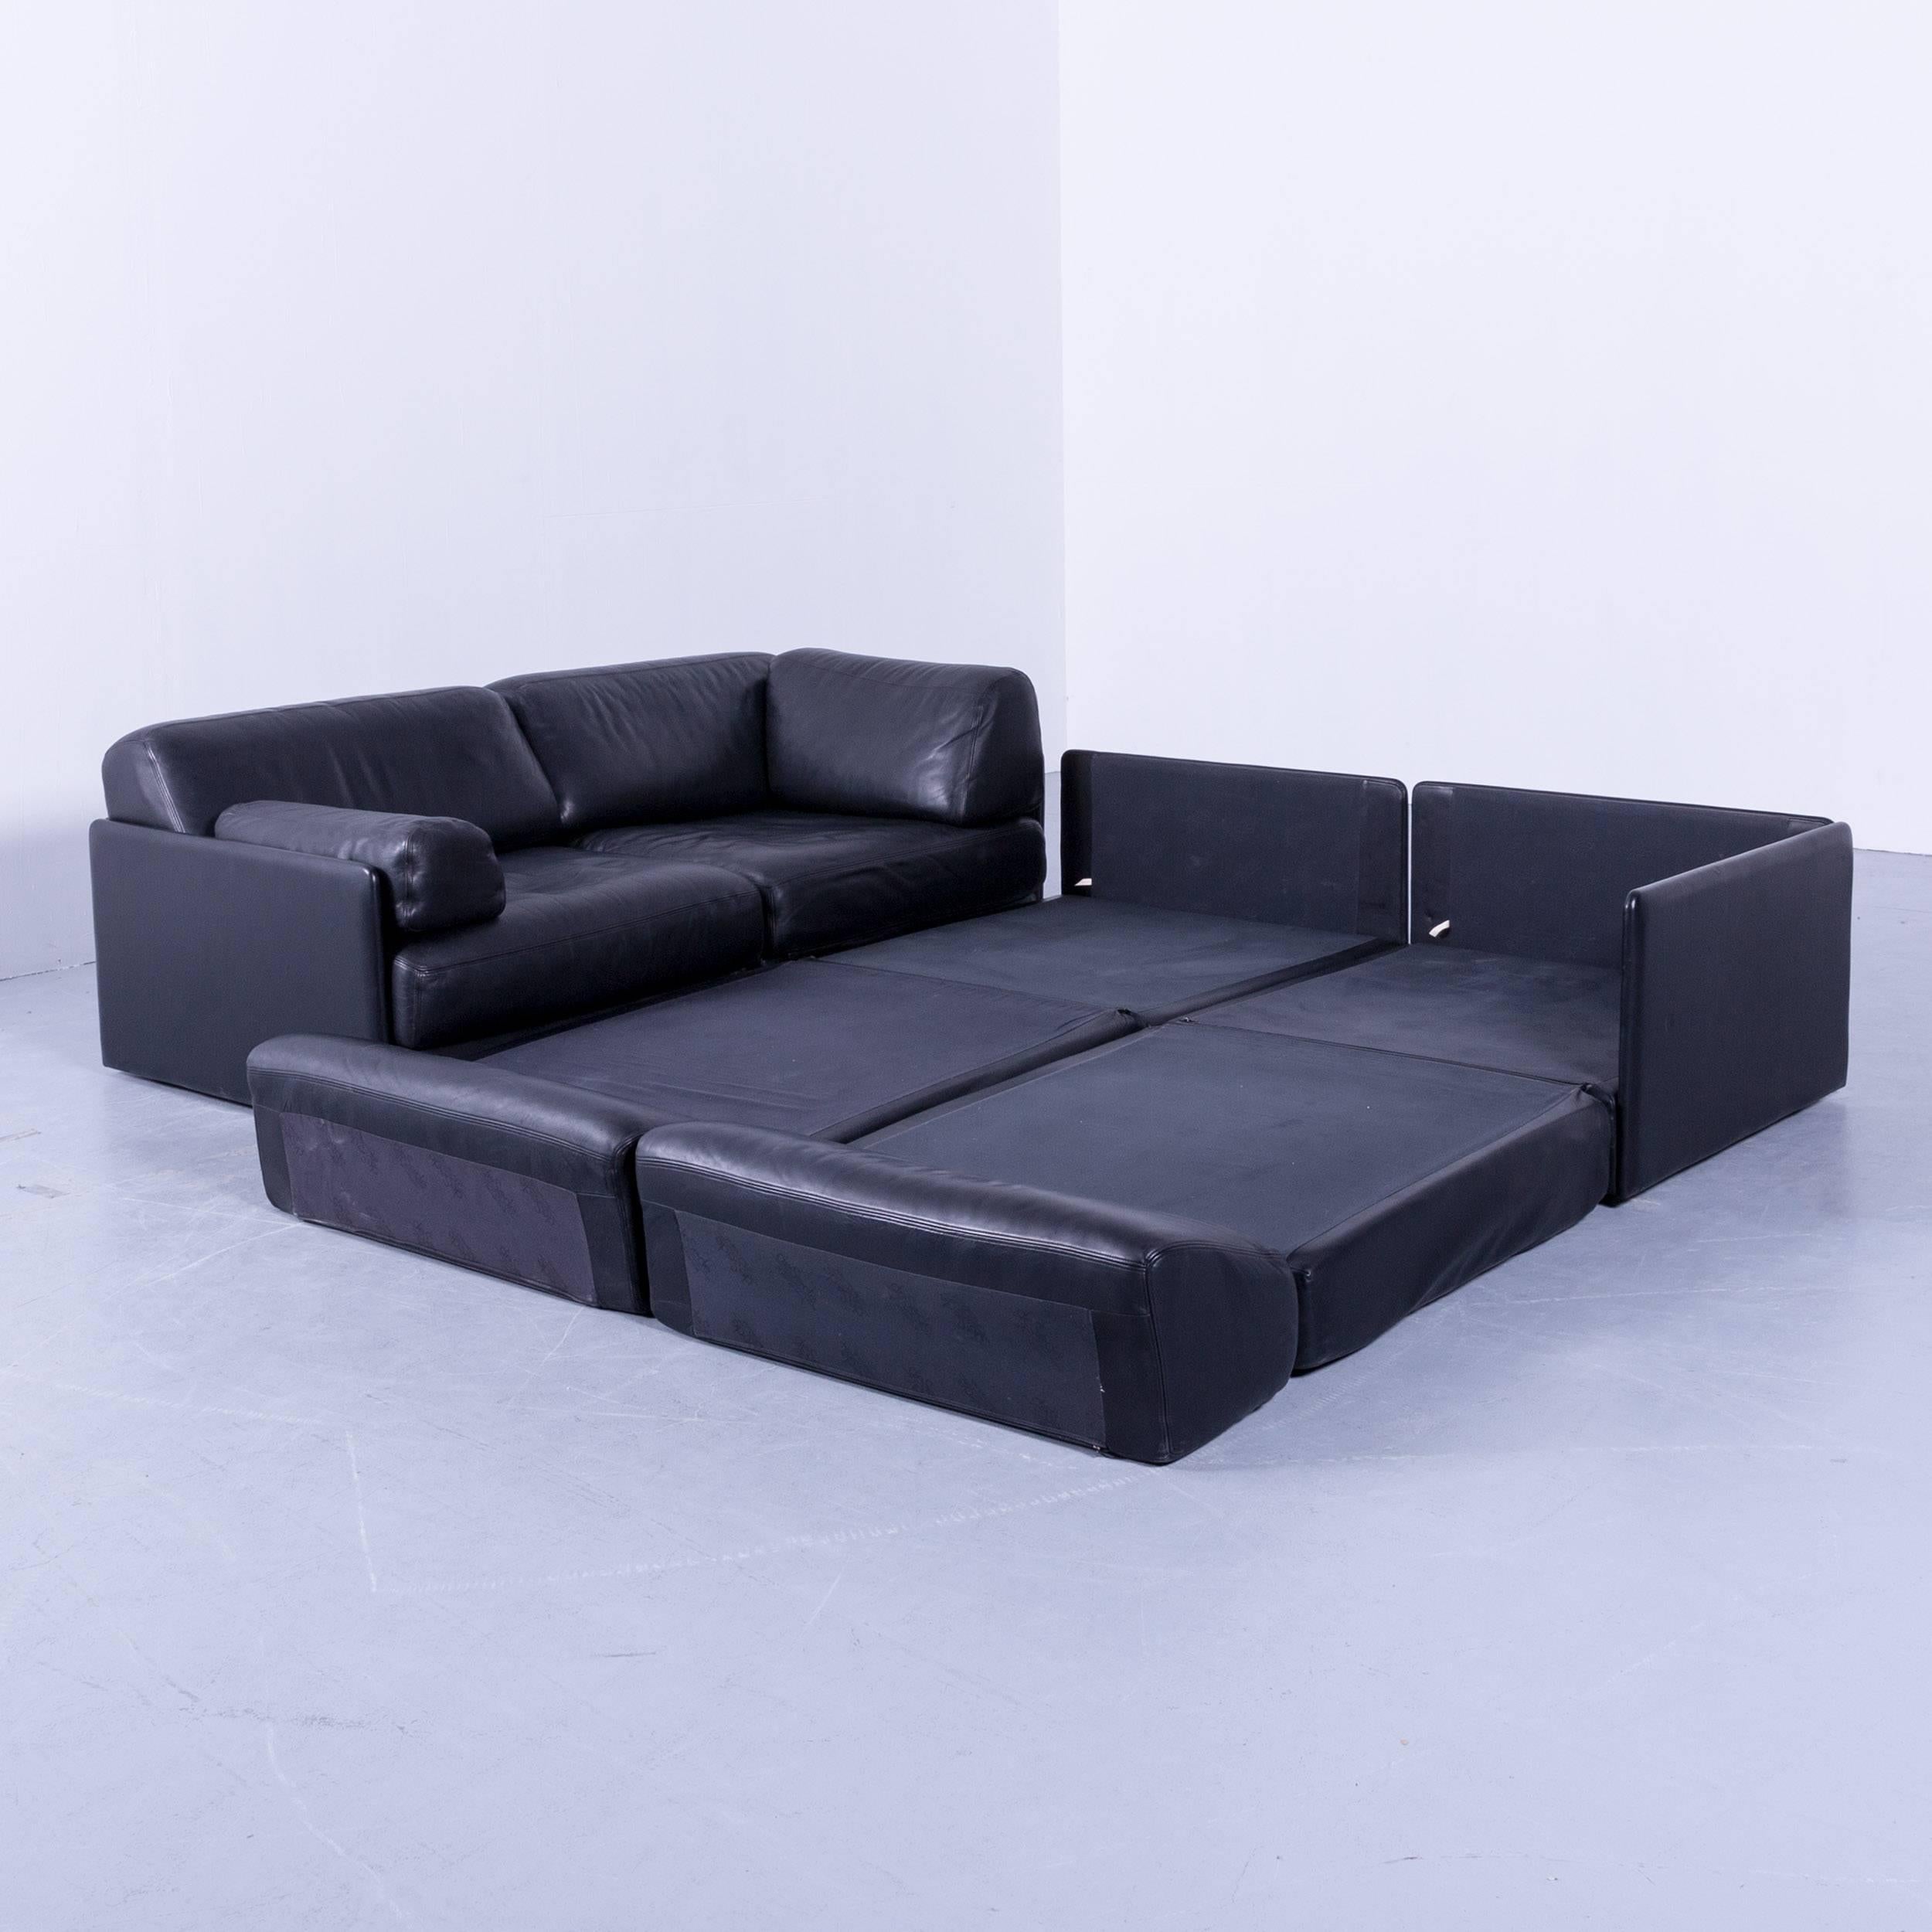 De Sede DS 76 designer corner sofa black leather sleeping function bed, with convenient sleep functions, made for pure comfort and style.